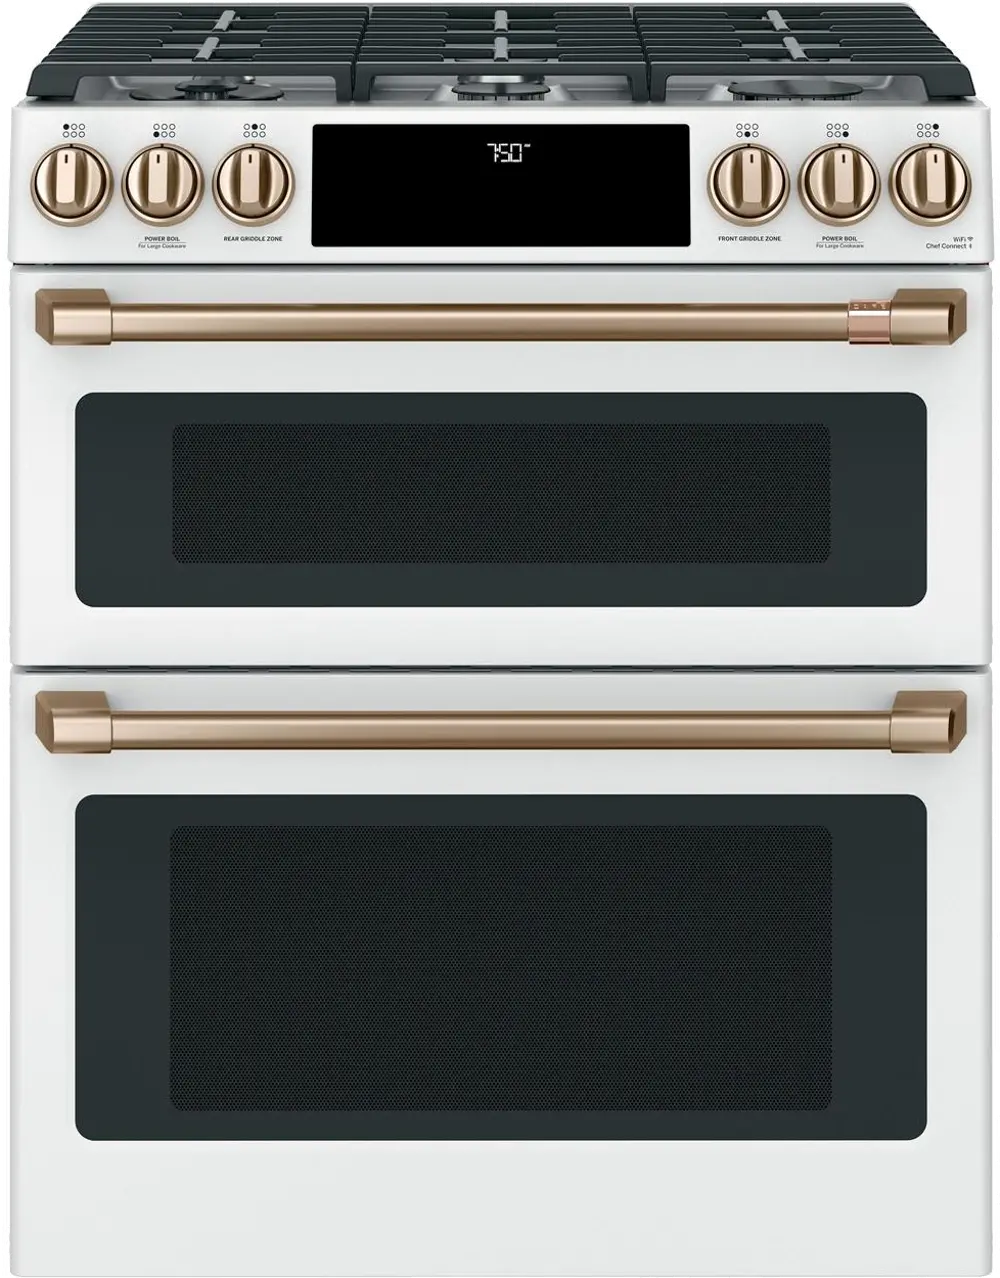 CGS750P4MW2 Cafe 7 cu ft Double Oven Gas Range - White-1